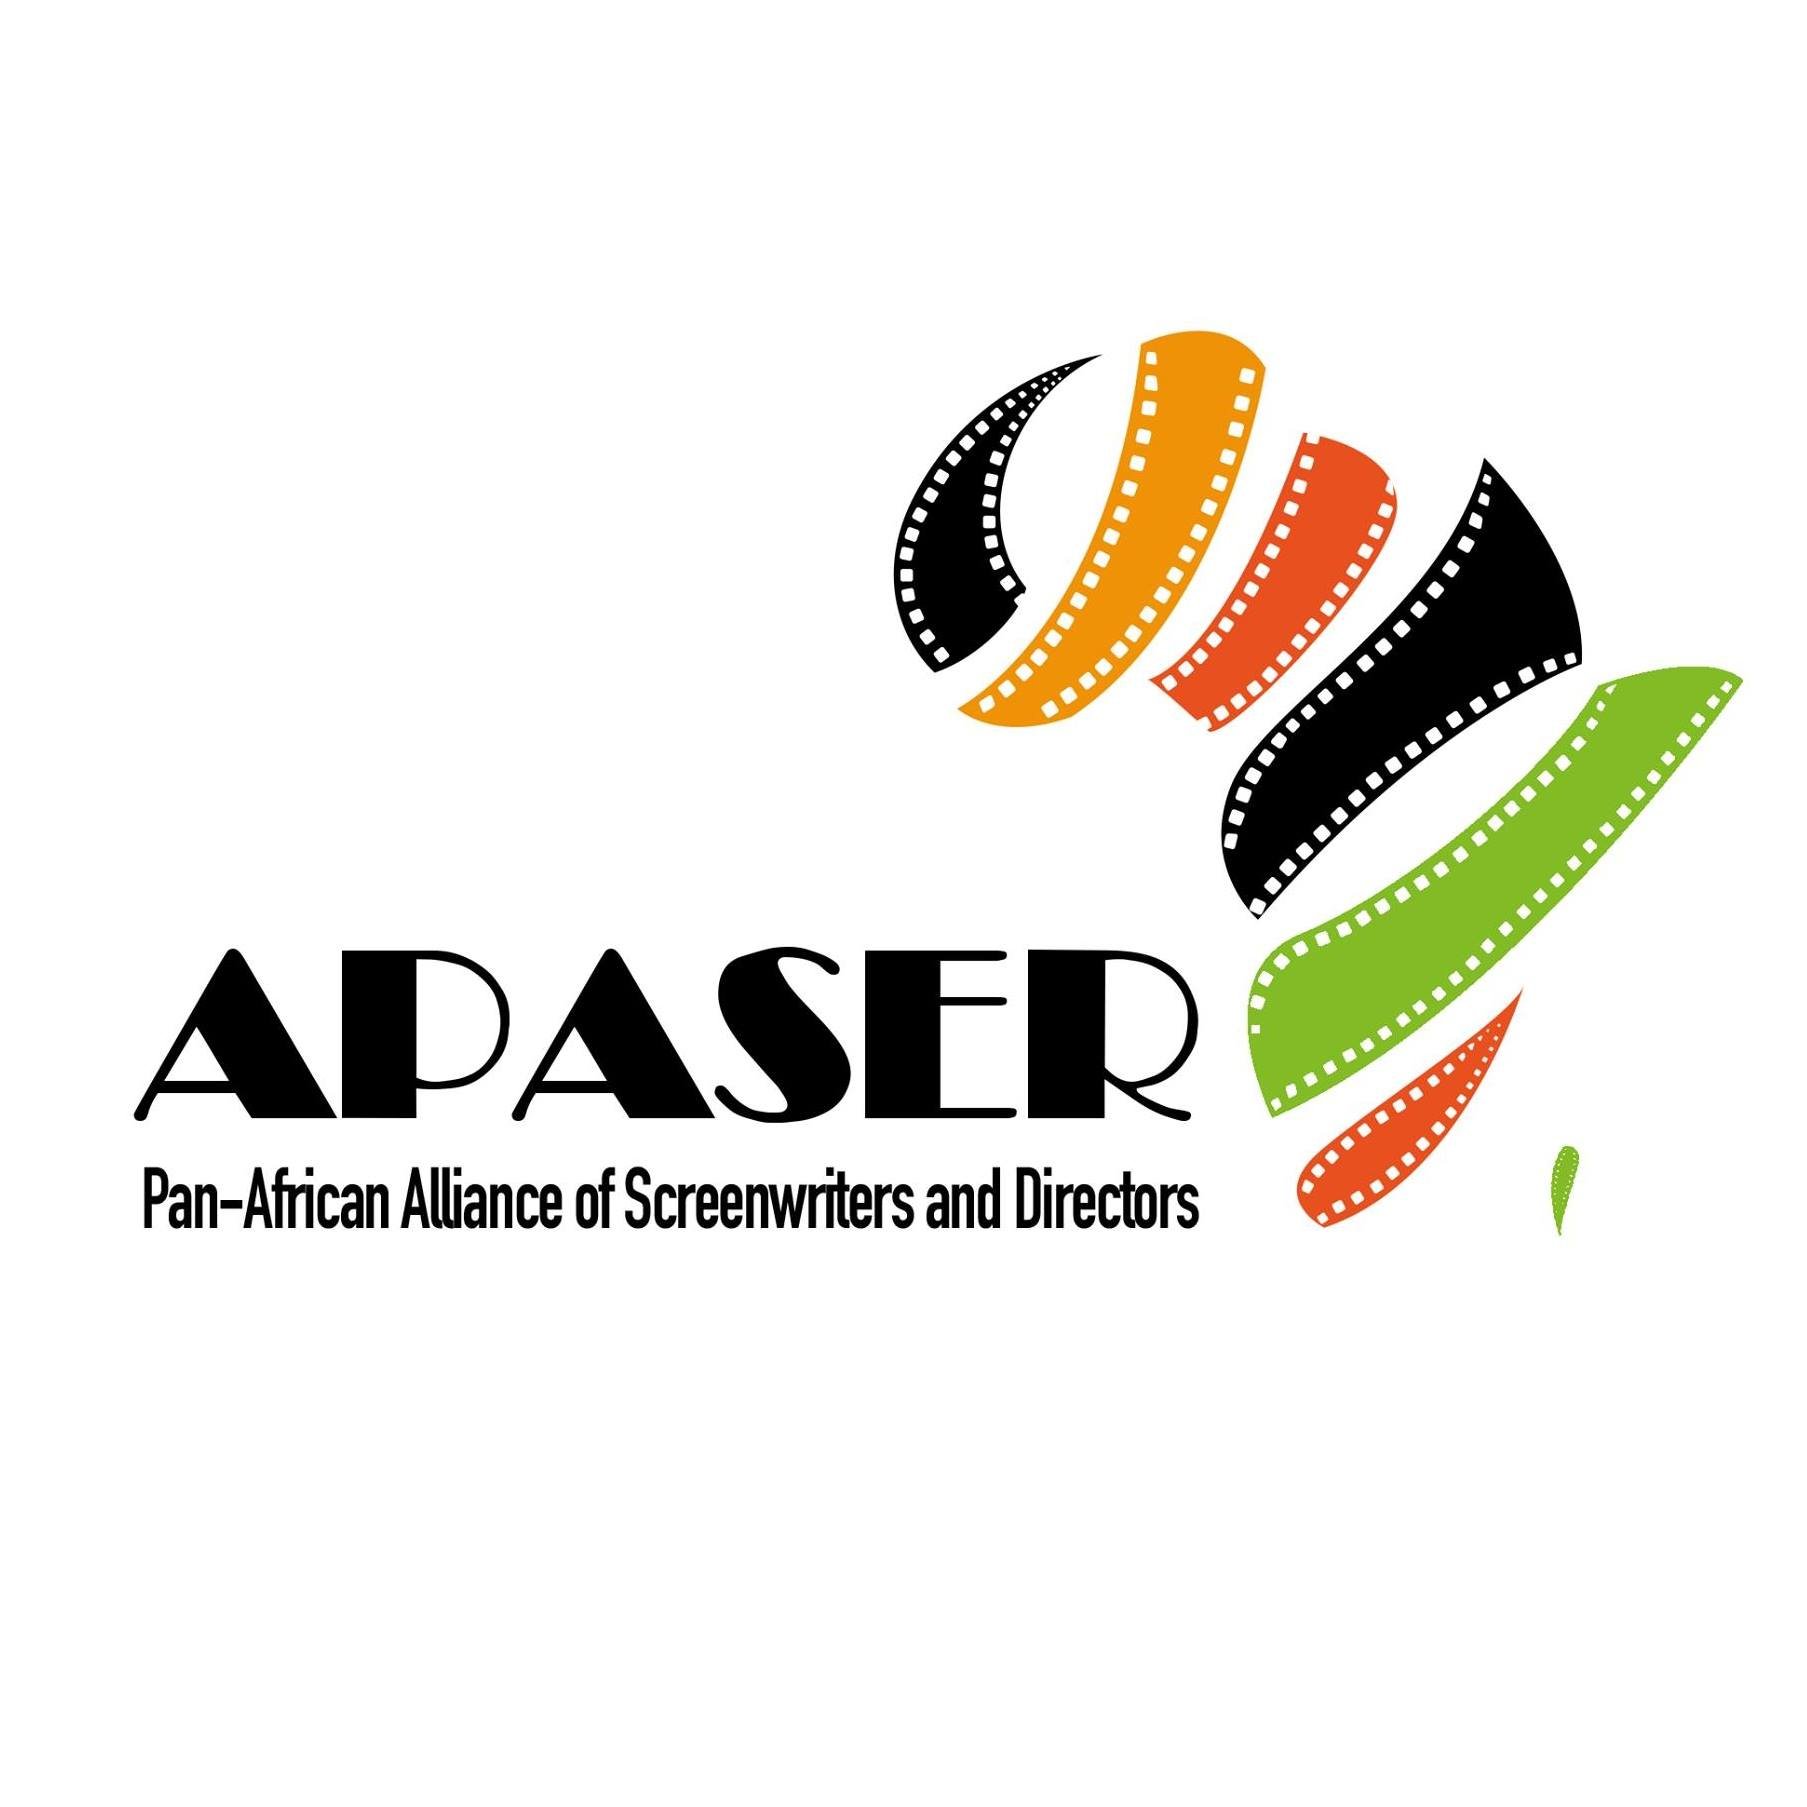 APASER is the Pan-African Alliance of Screenwriters and Filmmakers, working with @WADworldwide protect & promote the rights of audiovisual creators in Africa.